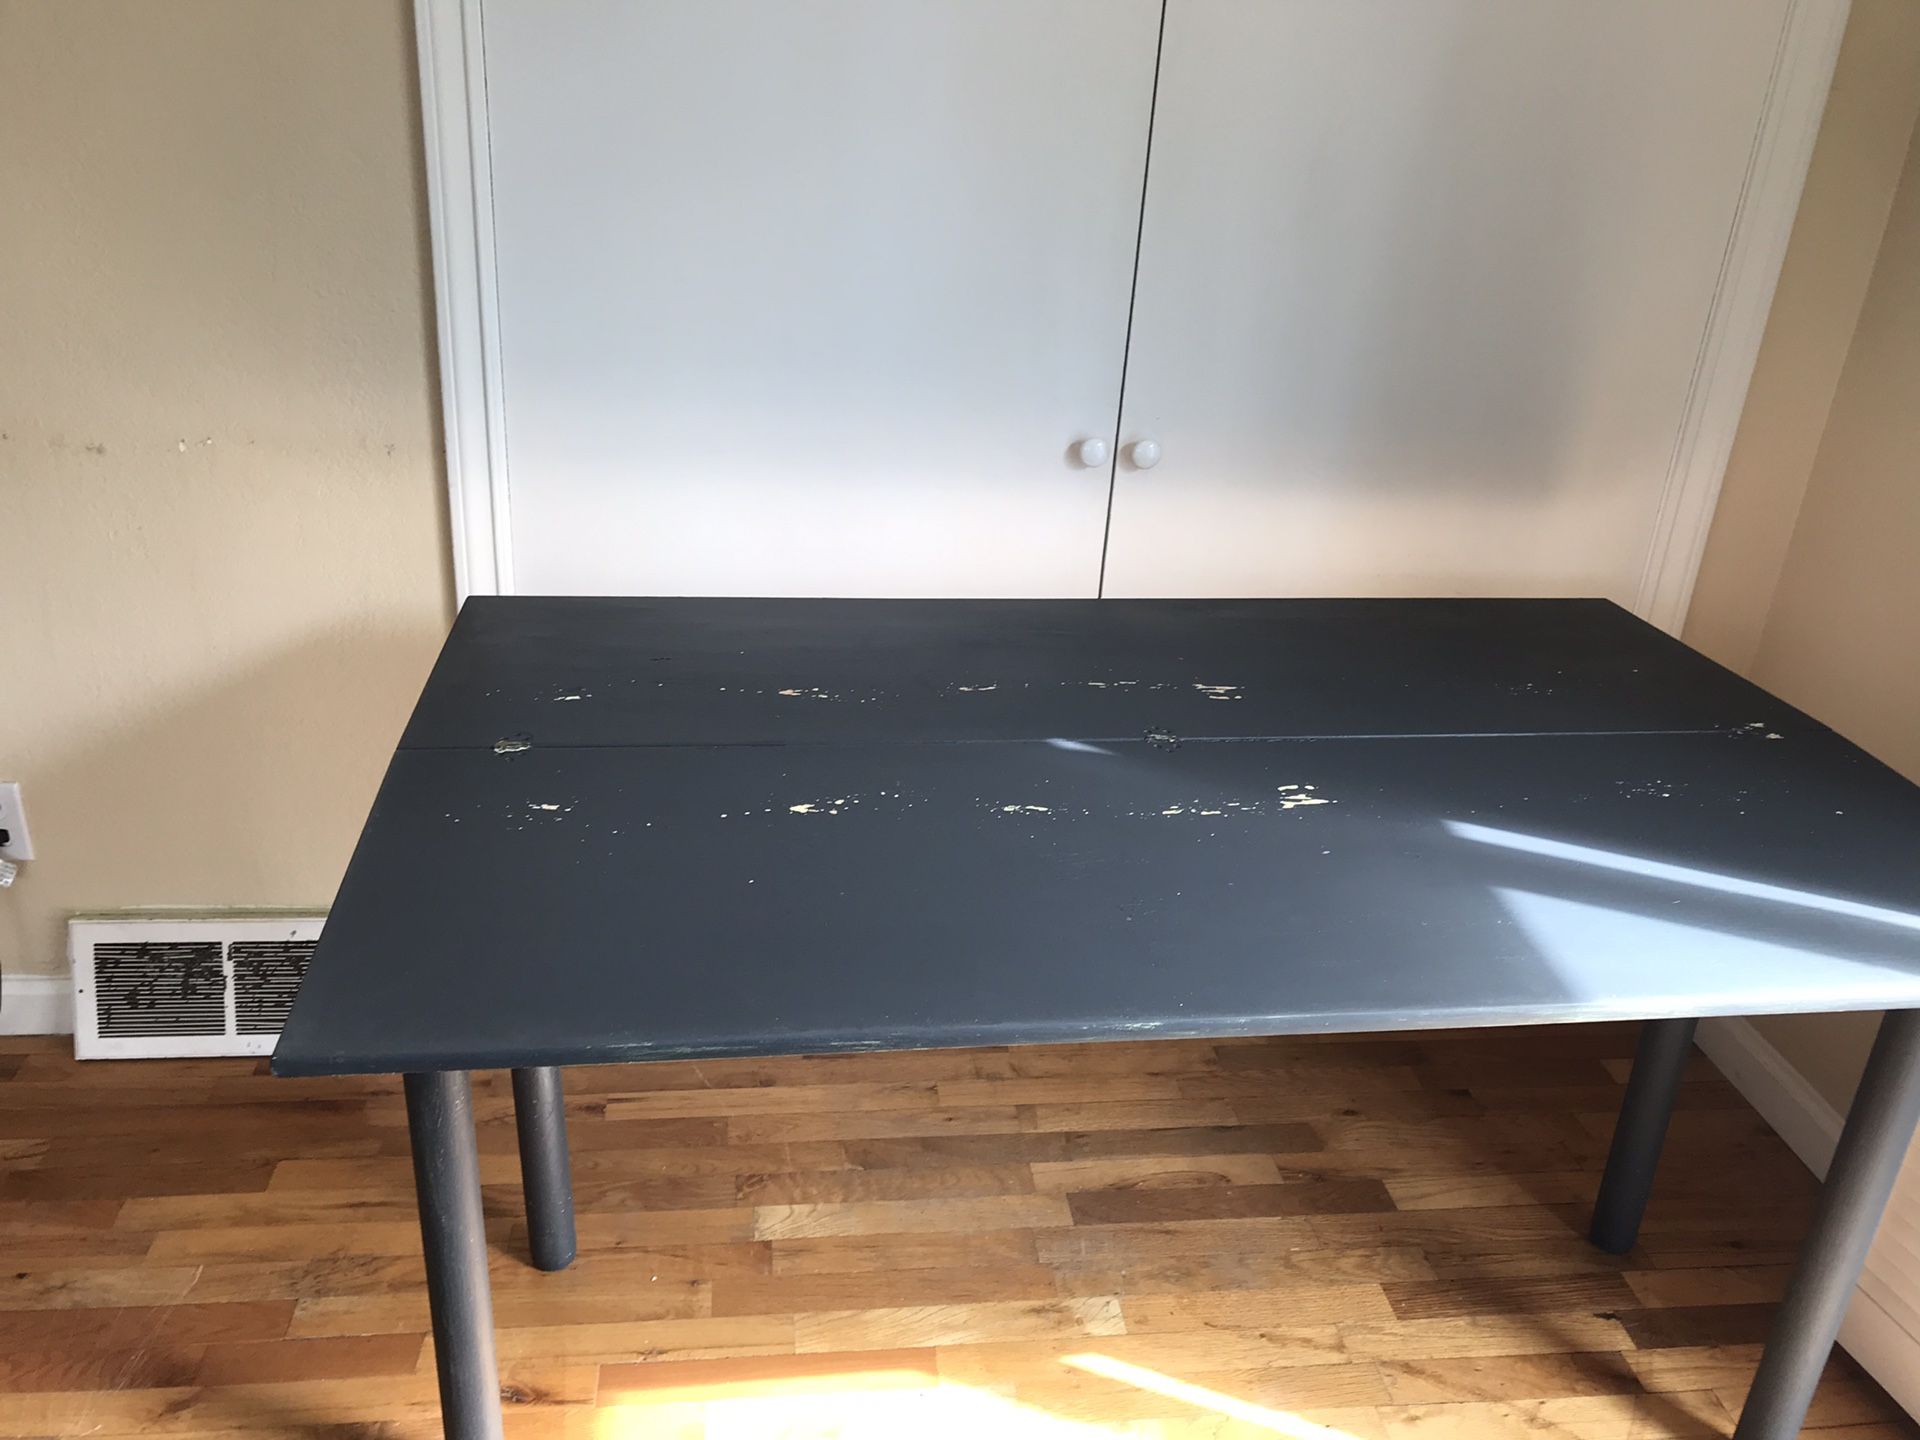 Sofa/kitchen or craft table